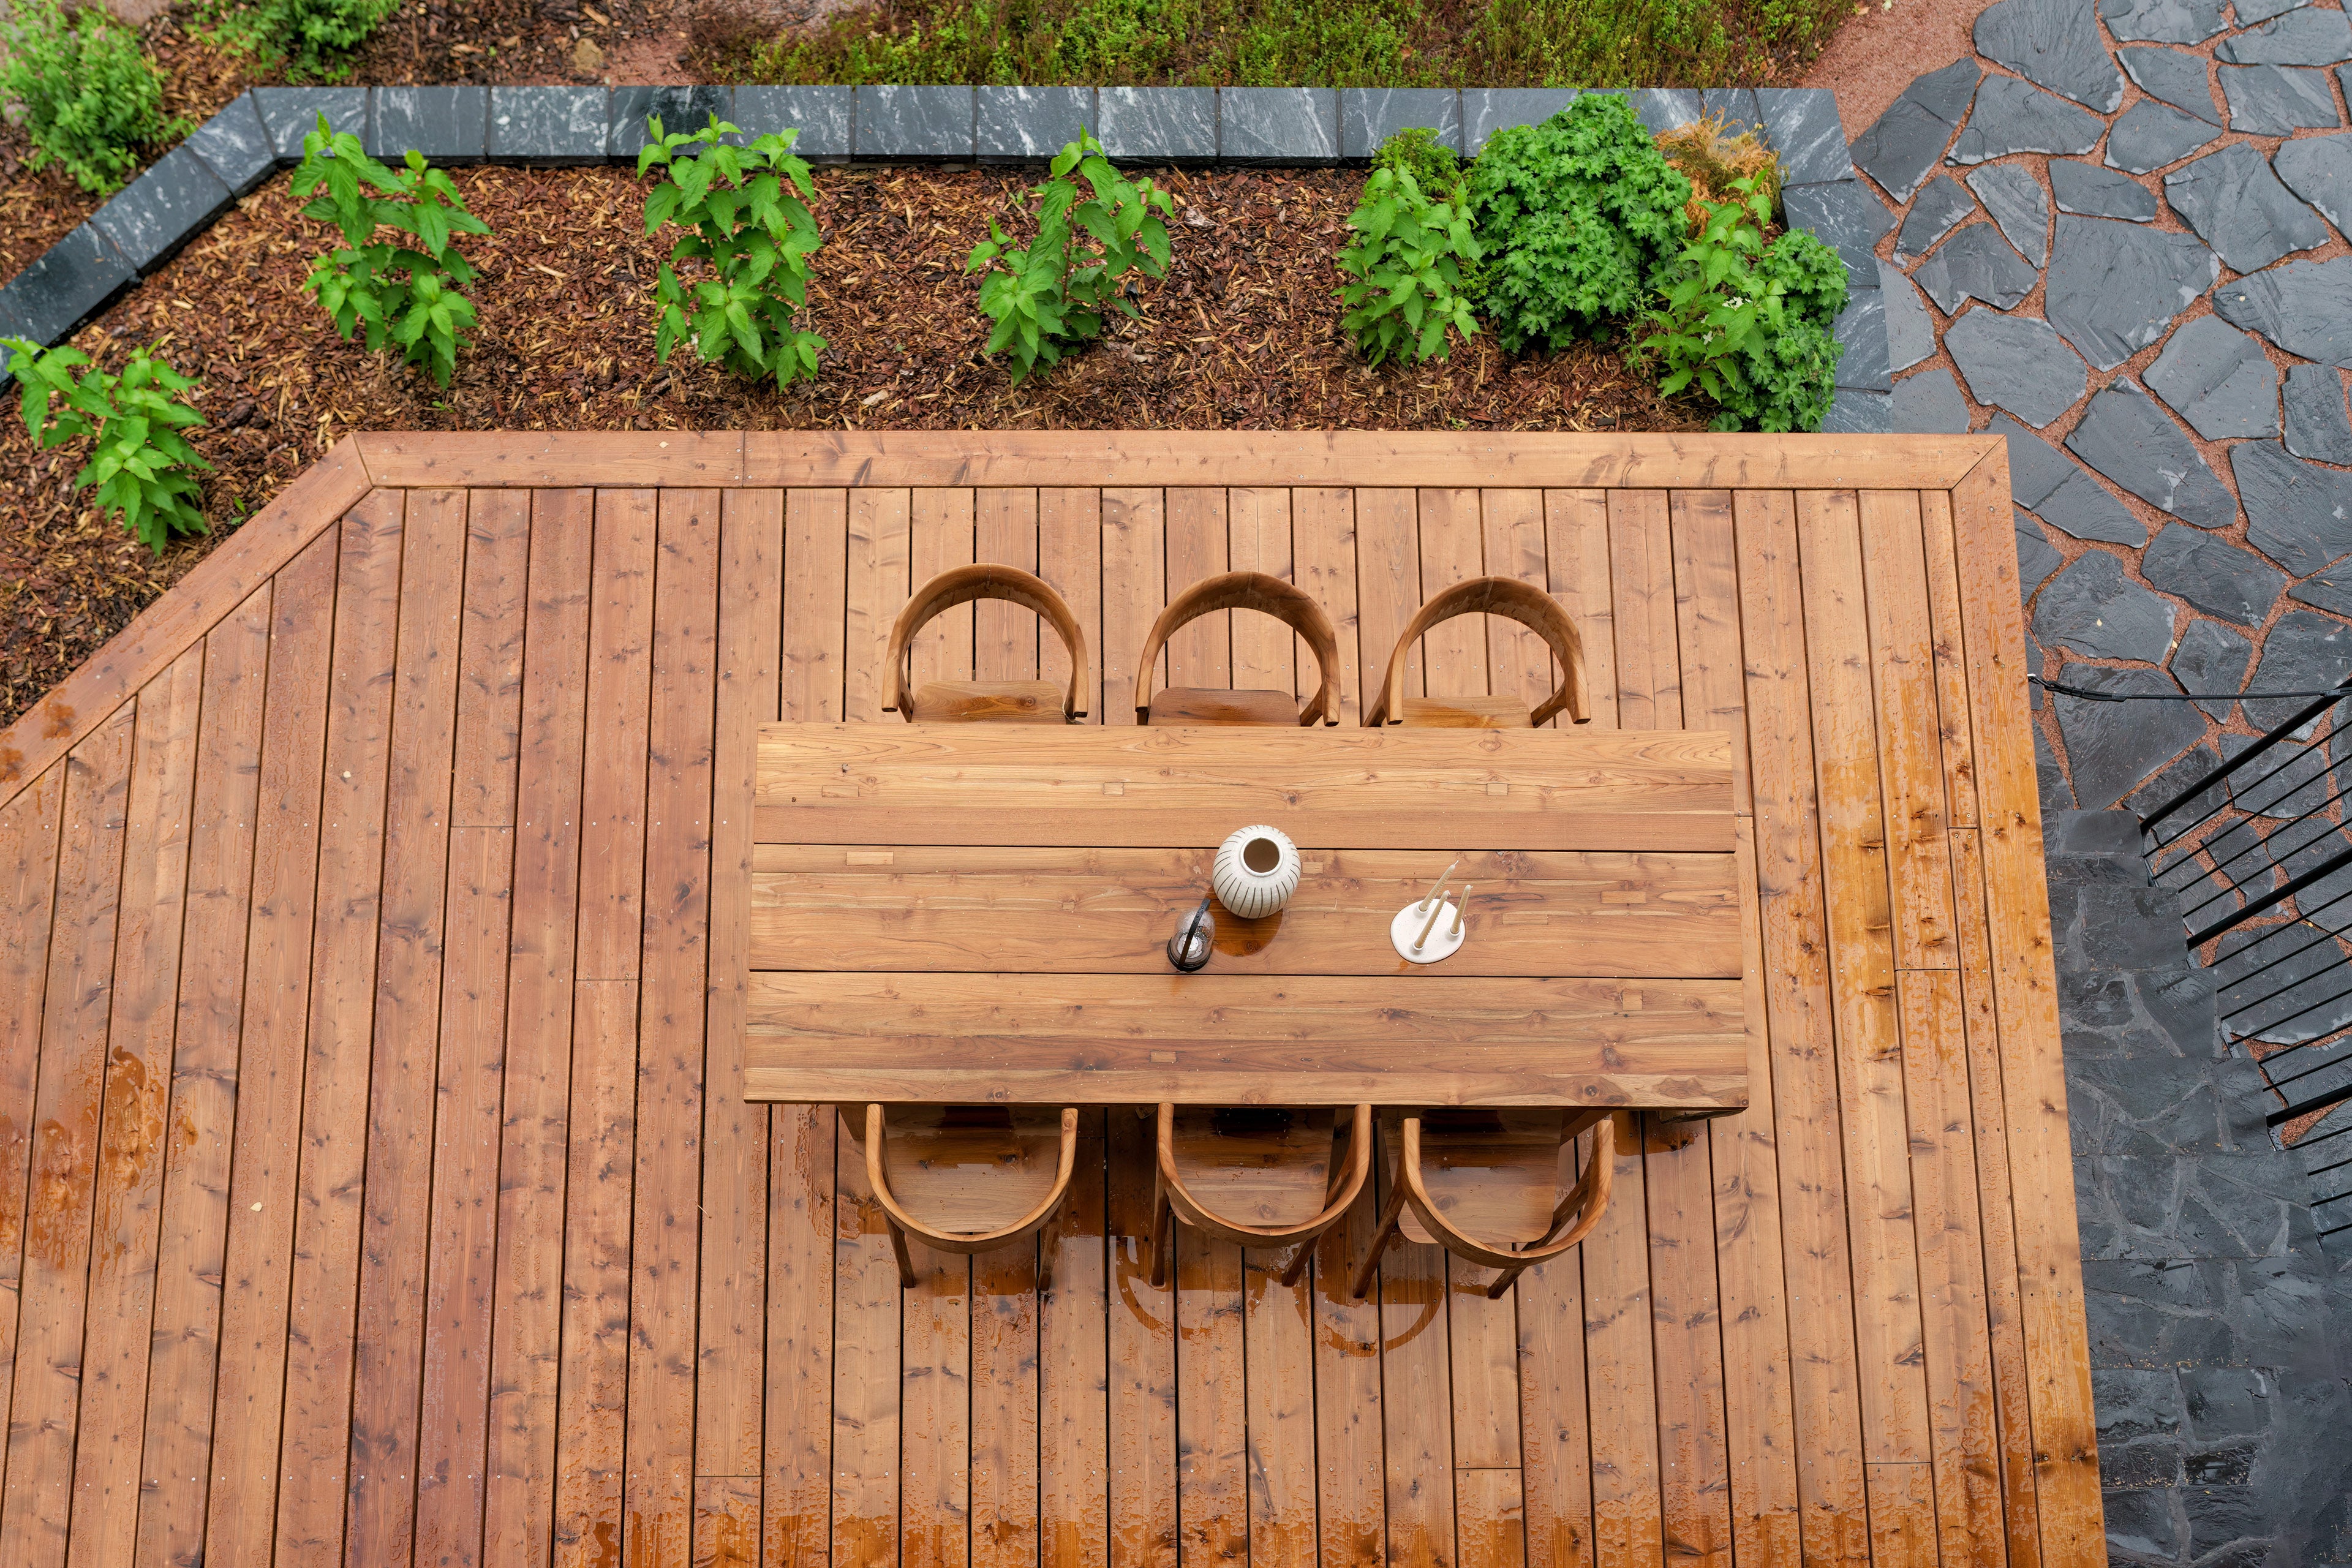 Bird's eye view of a pressure treated deck